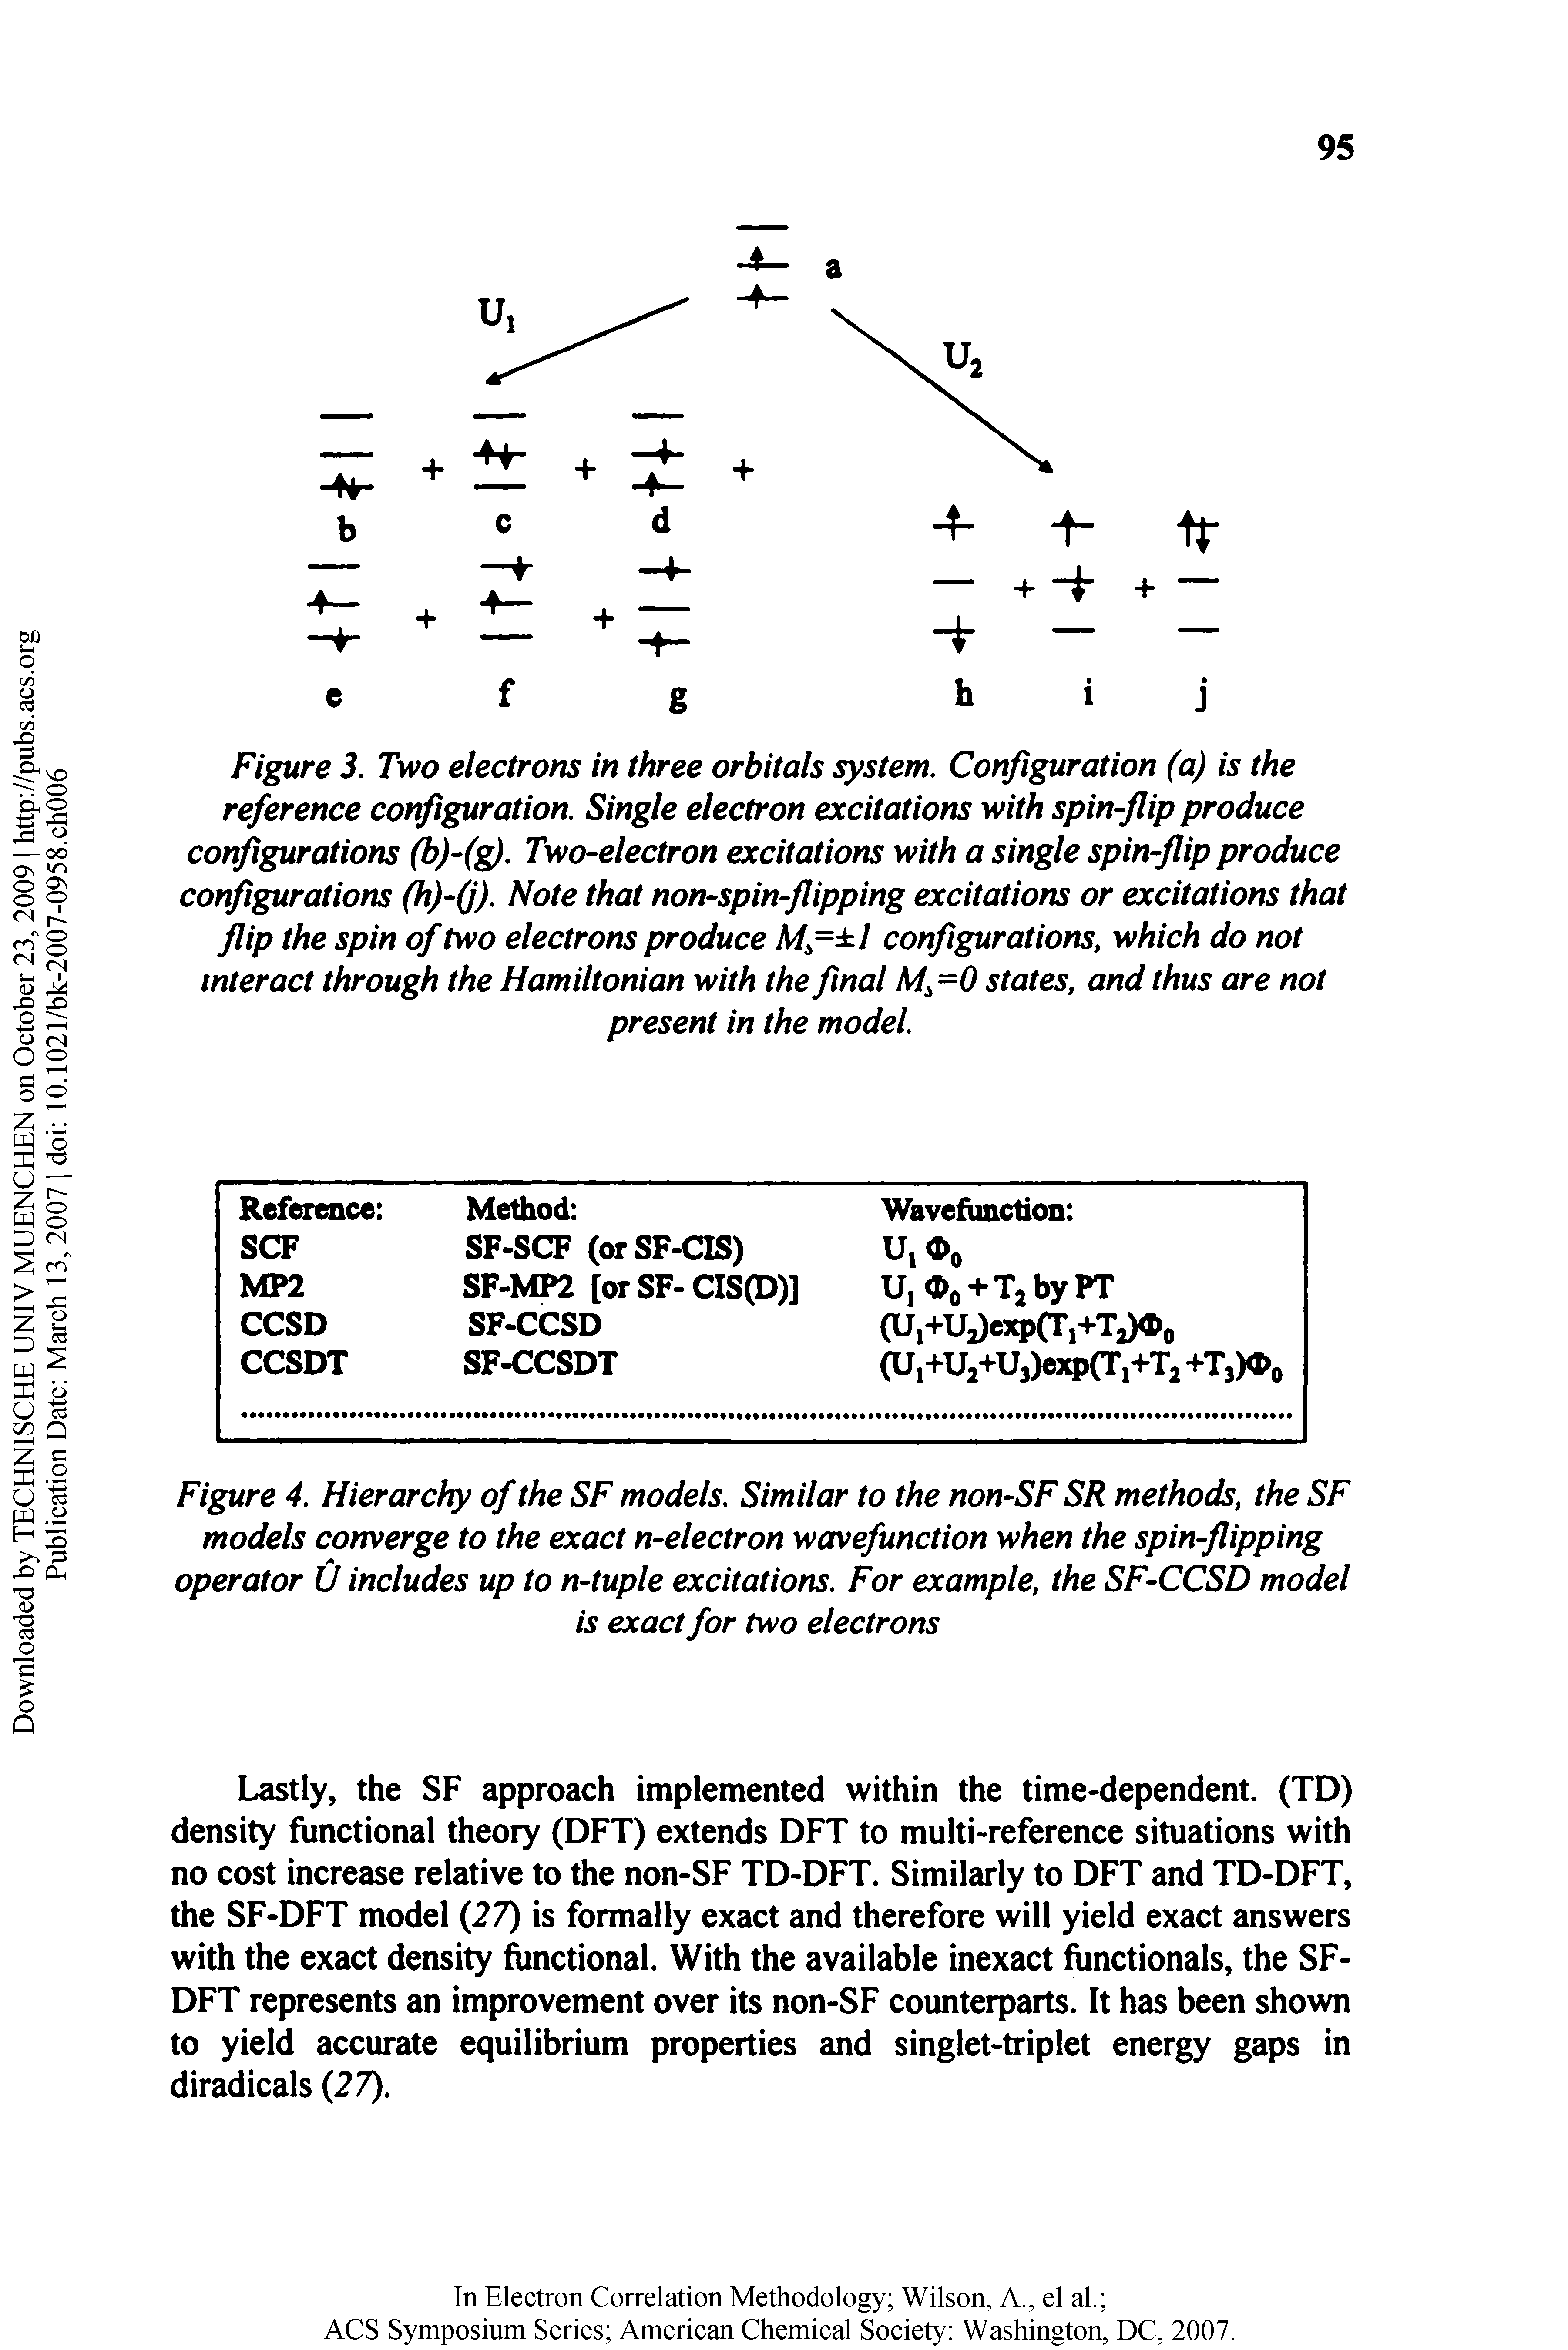 Figure 3. Two electrons in three orbitals system. Configuration (a) is the reference configuration. Single electron excitations with spin-flip produce configurations (bf(g). Two-electron excitations with a single spin-flip produce configurations (h)-(j). Note that non-spin-flipping excitations or excitations that flip the spin of two electrons produce M = l configurations, which do not interact through the Hamiltonian with the final M =0 states, and thus are not...